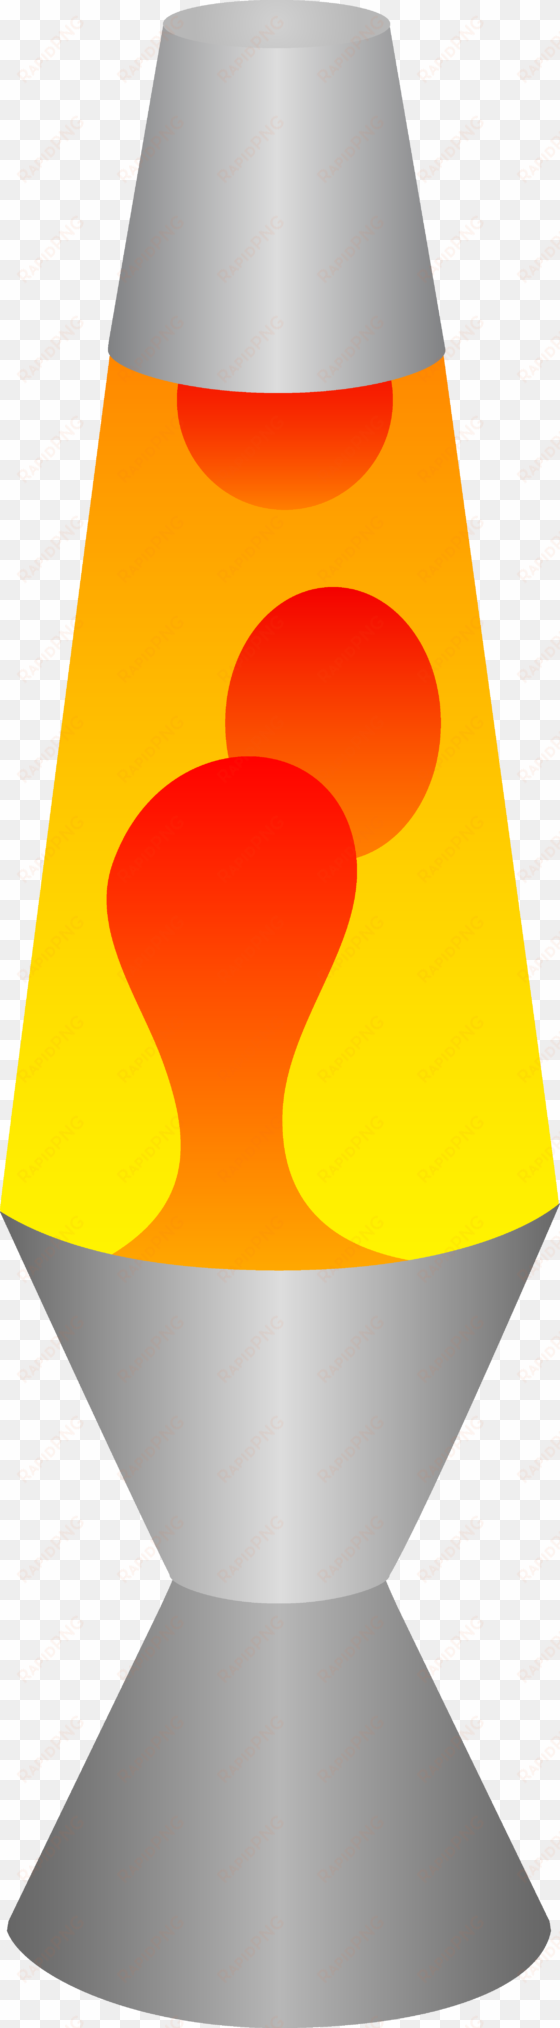 tall lamp clipart - lava lamp clipart png